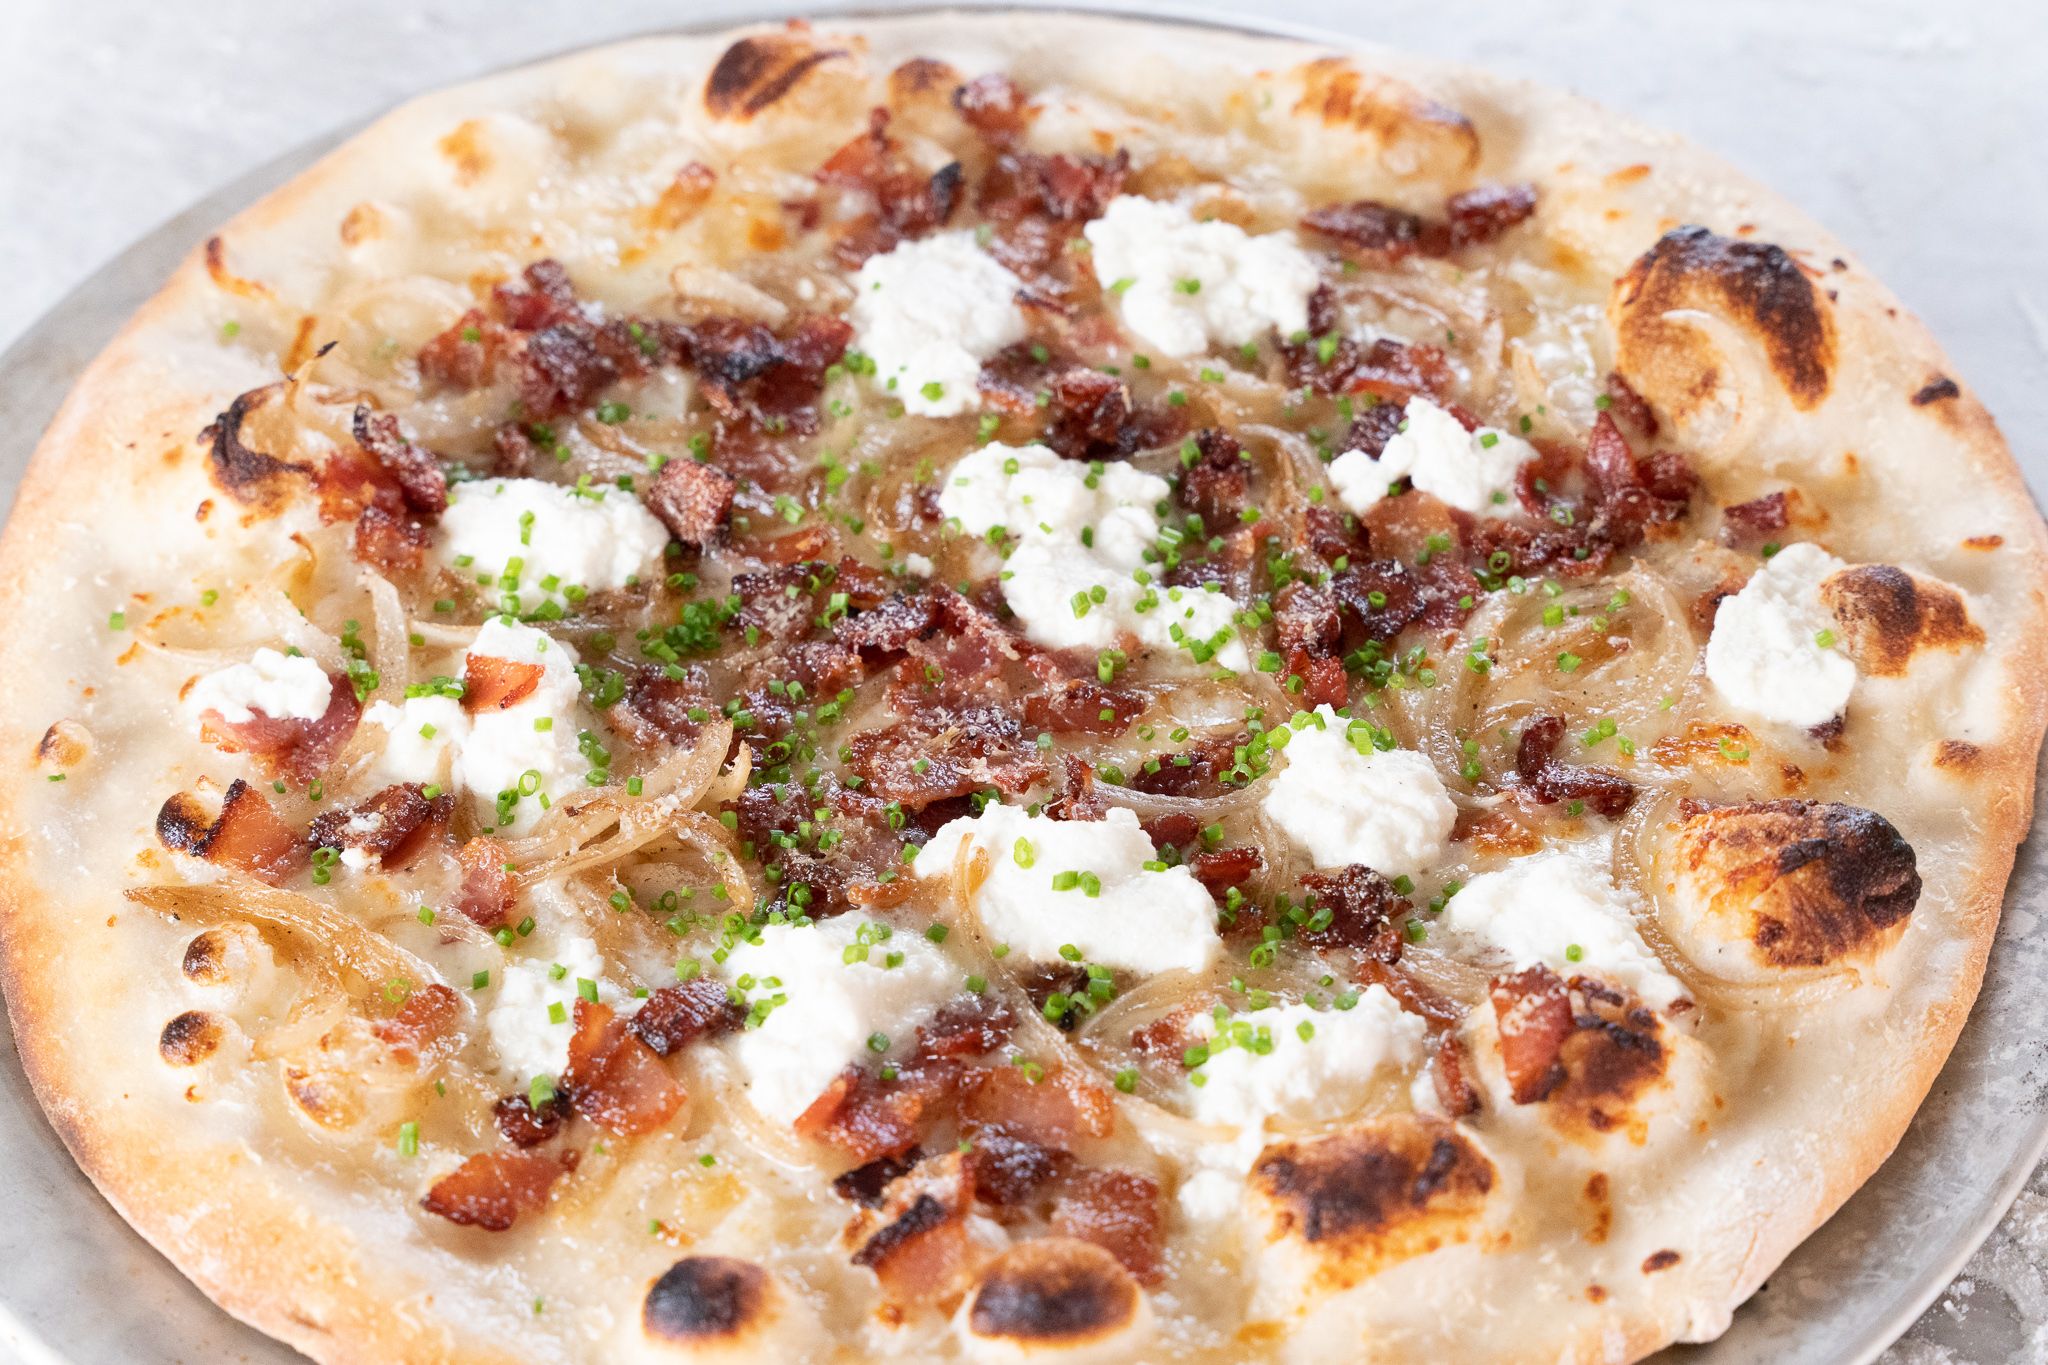 For National Pizza Day Feb. 9, Coast Packing Recommends Lard for That Crust – and Has Recipes to Celebrate the Occasion